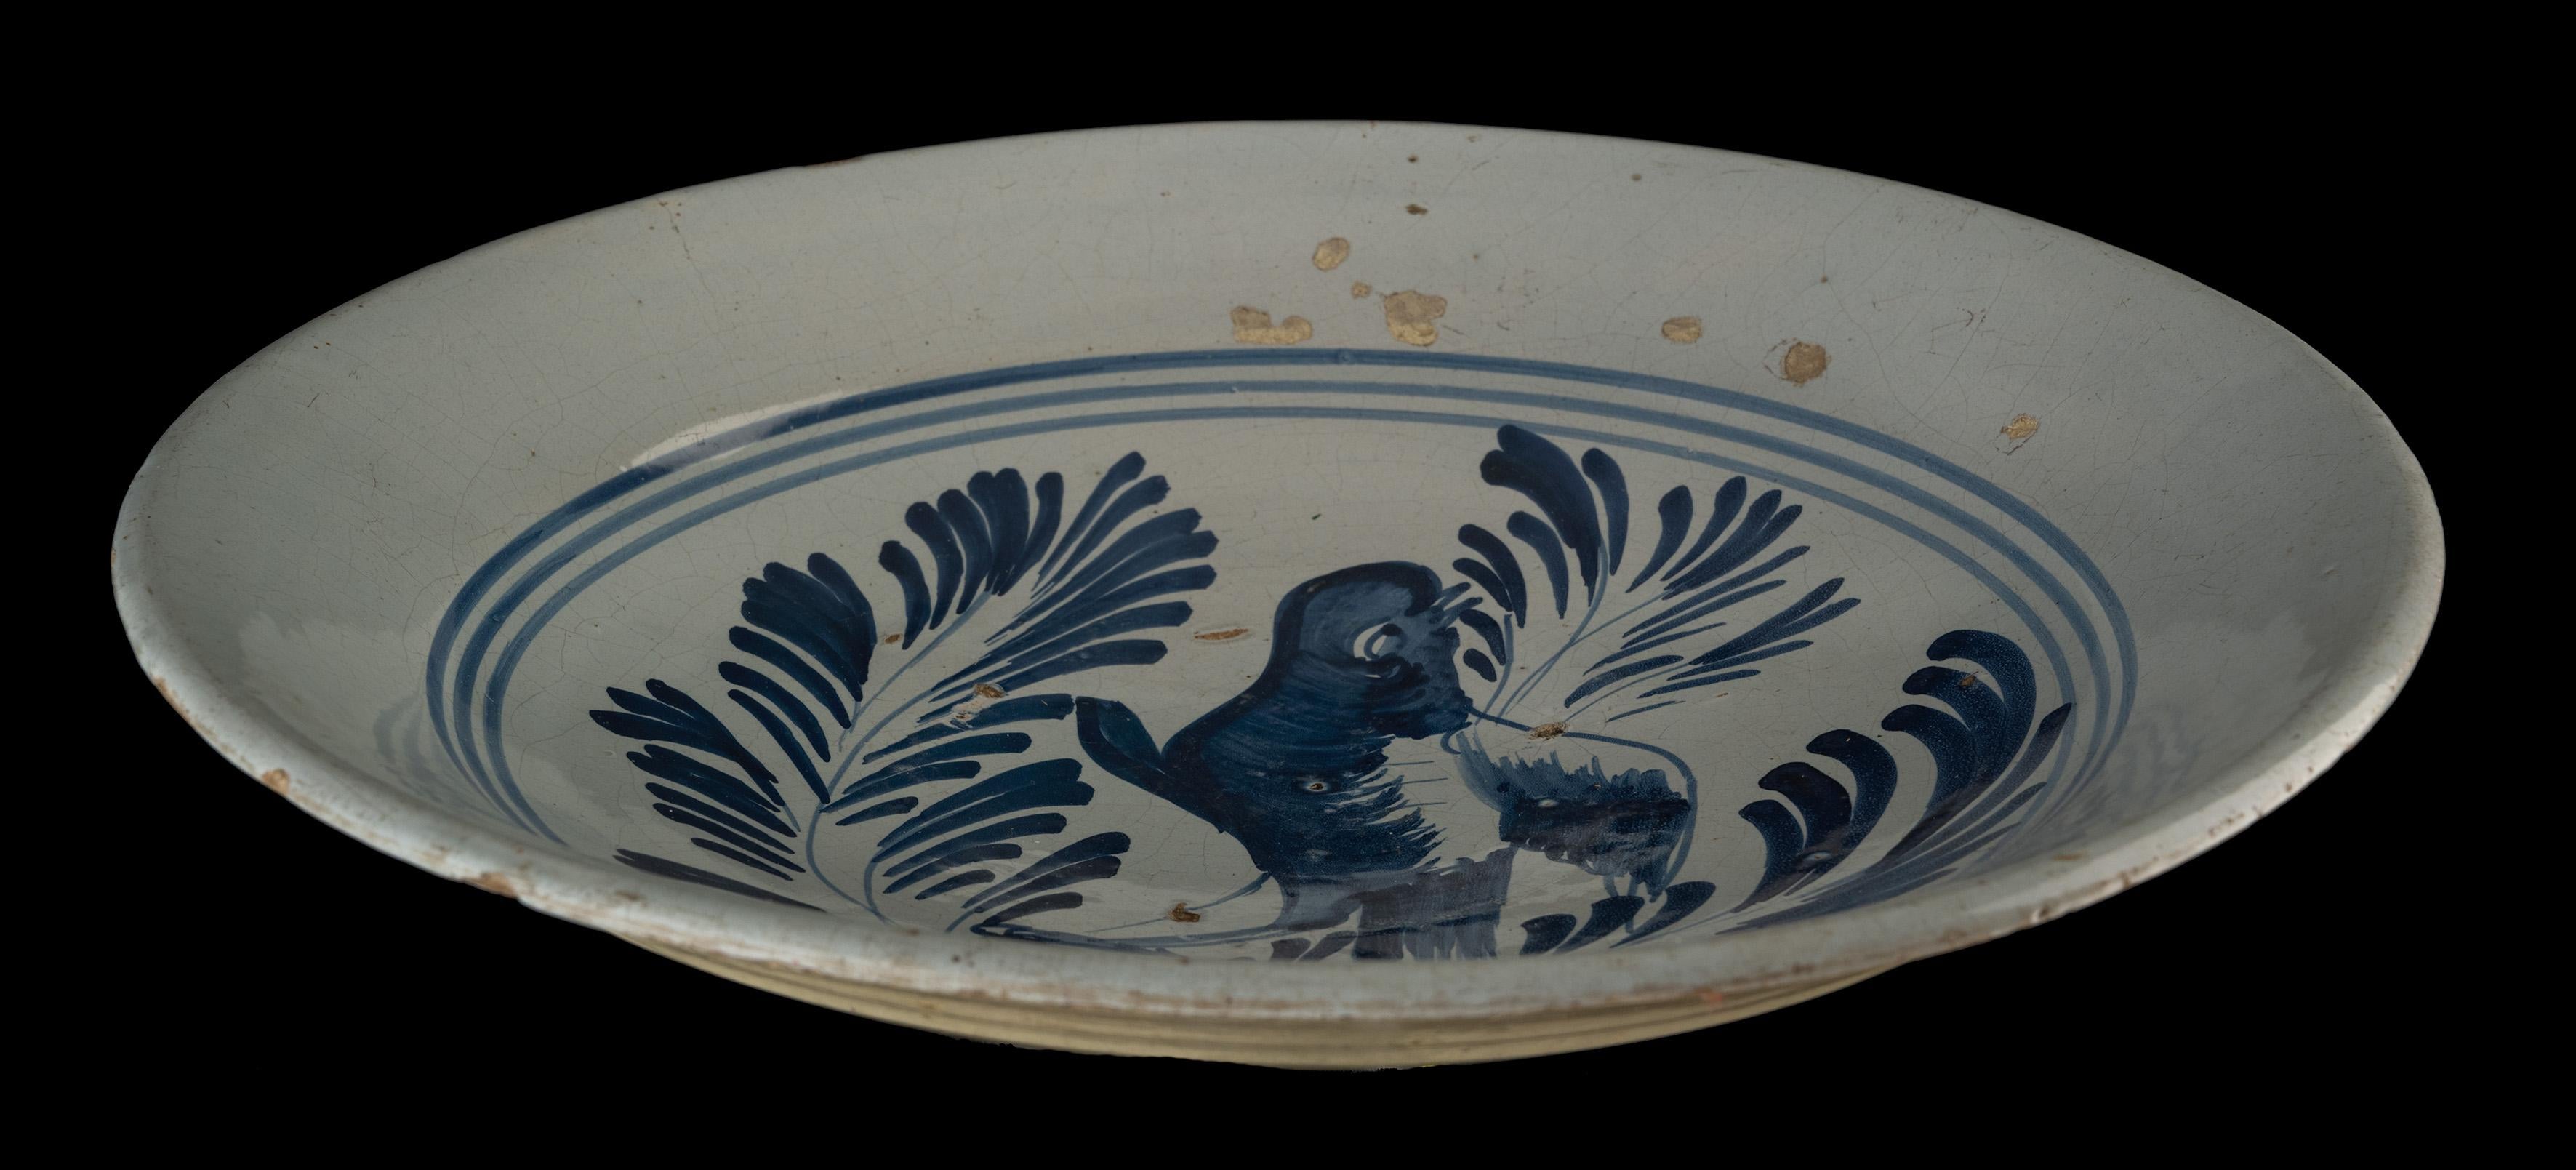 Ceramic Large Delft Blue and White Charger with a Bird on a Branch, Harlingen, 1775-1800 For Sale